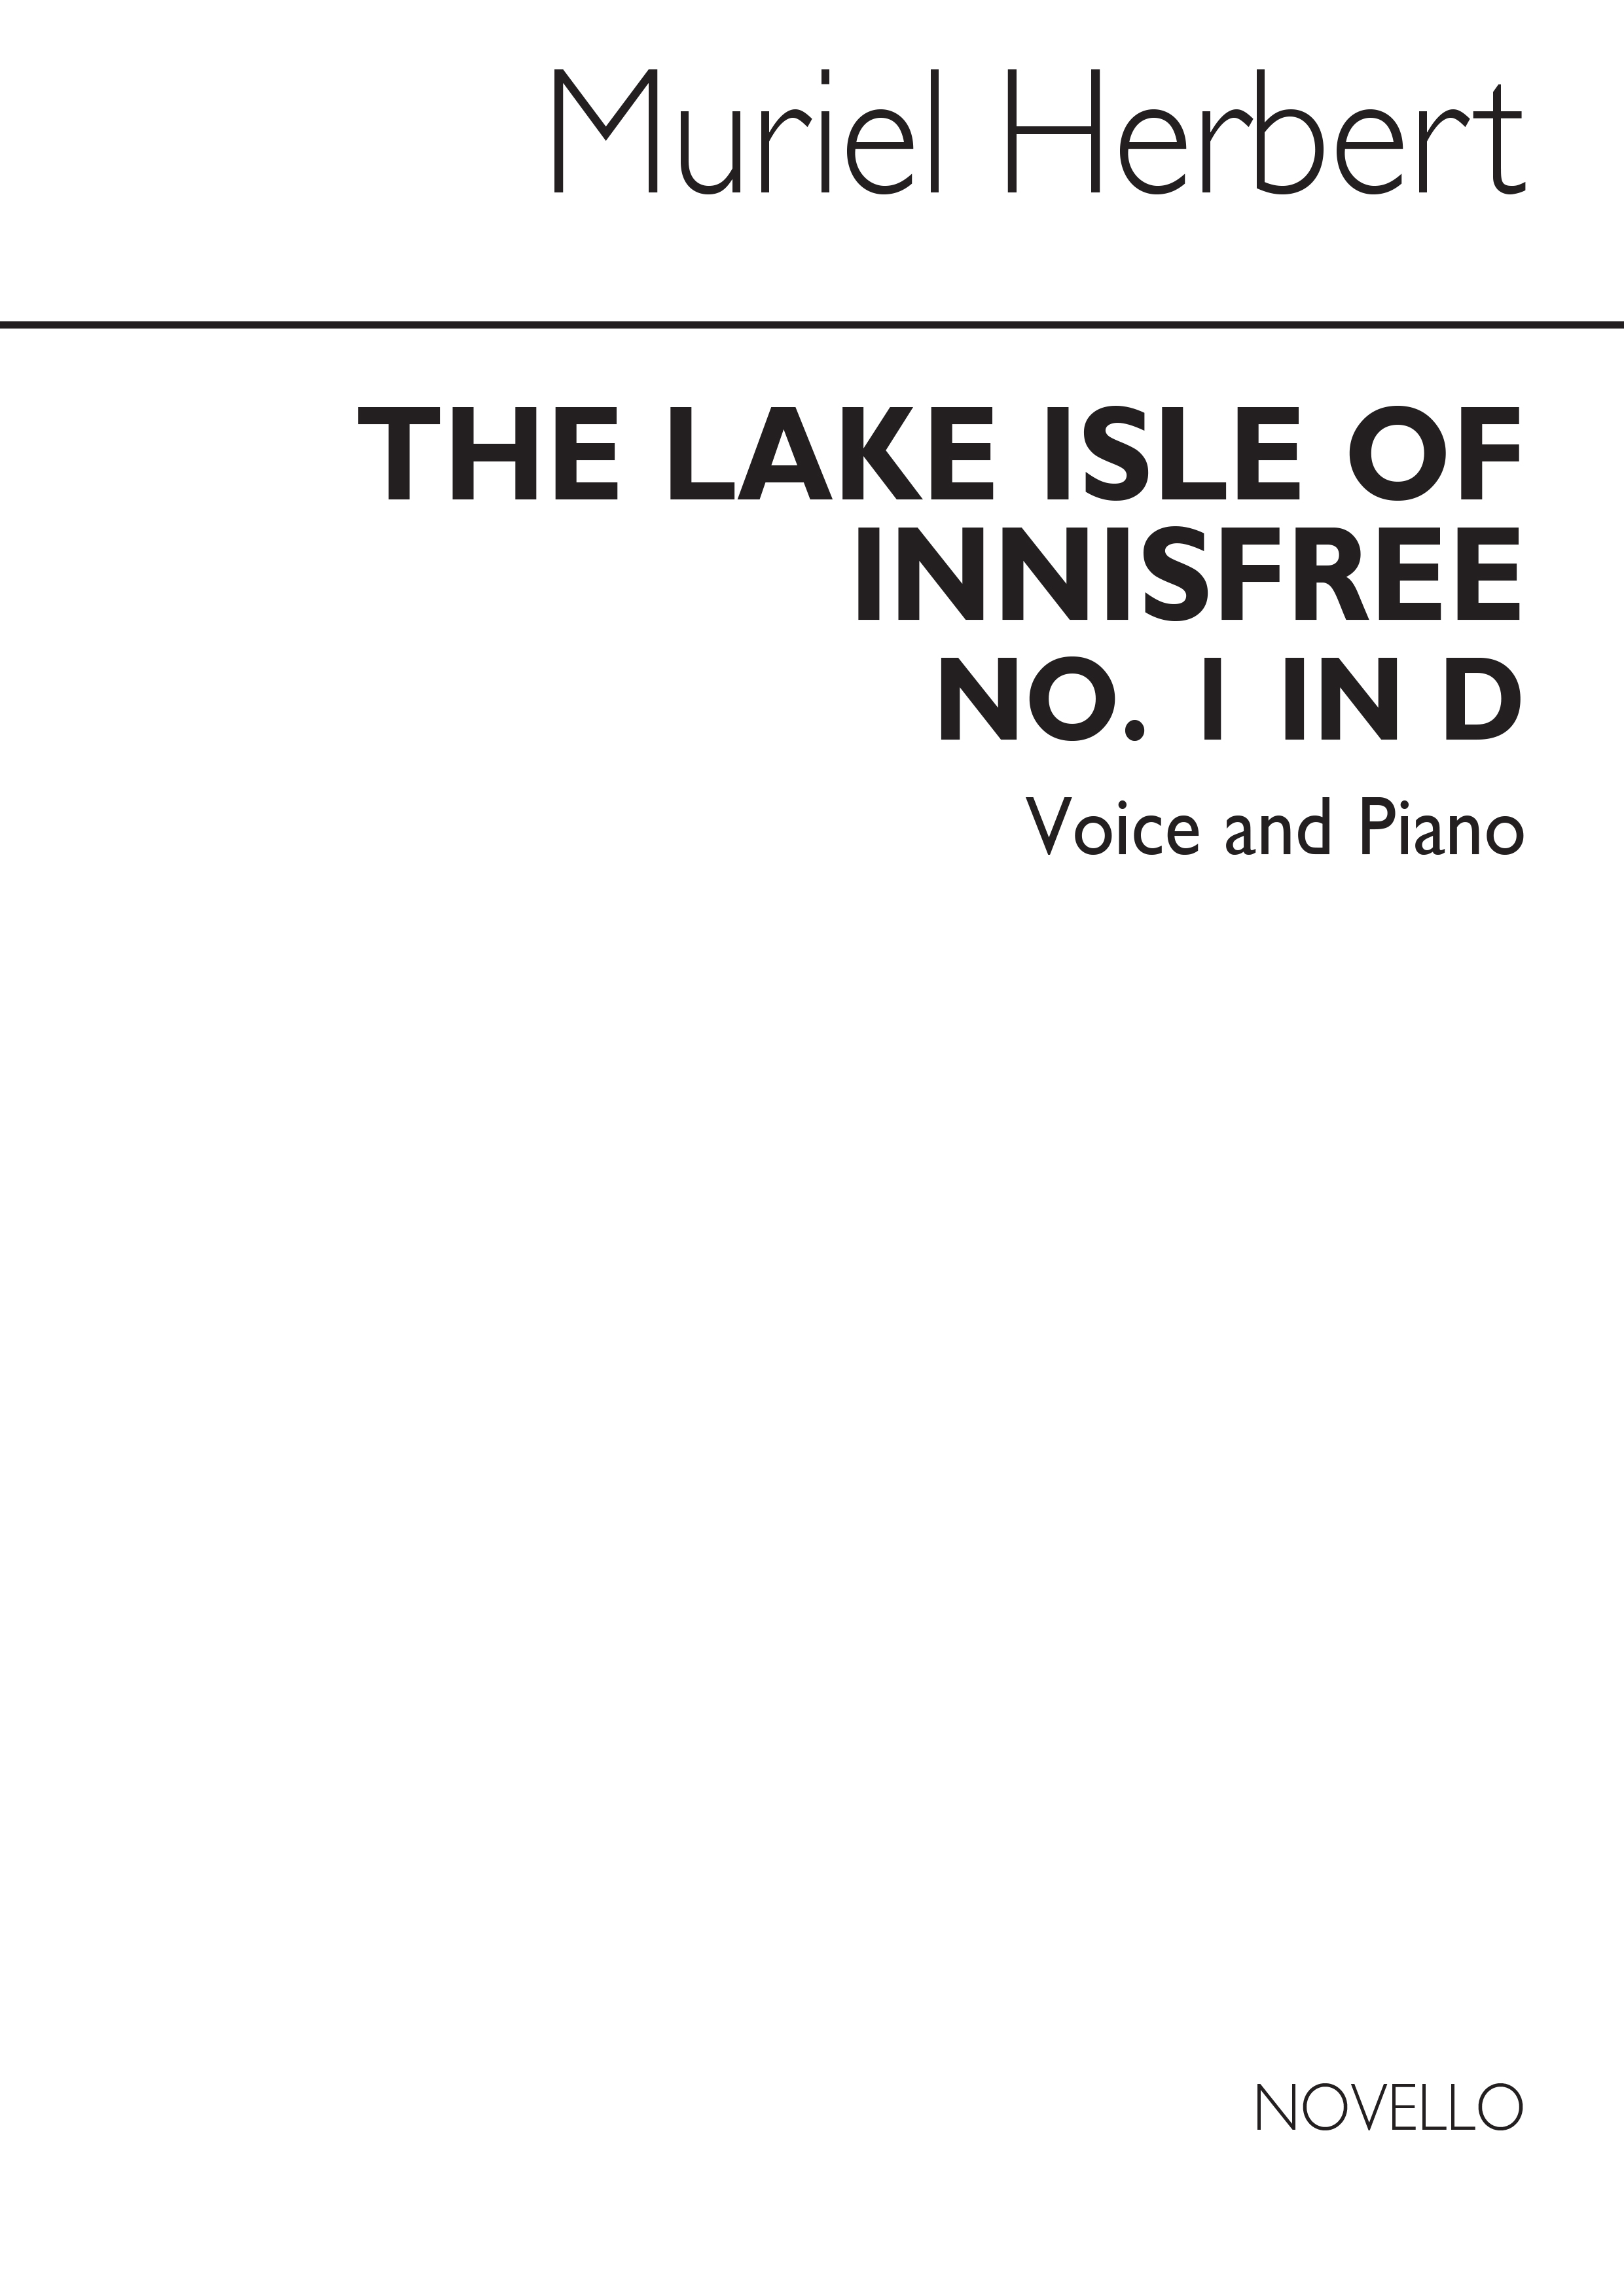 Muriel Herbert: The Lake Isle Of Innisfree Voice And Piano No.1 In D